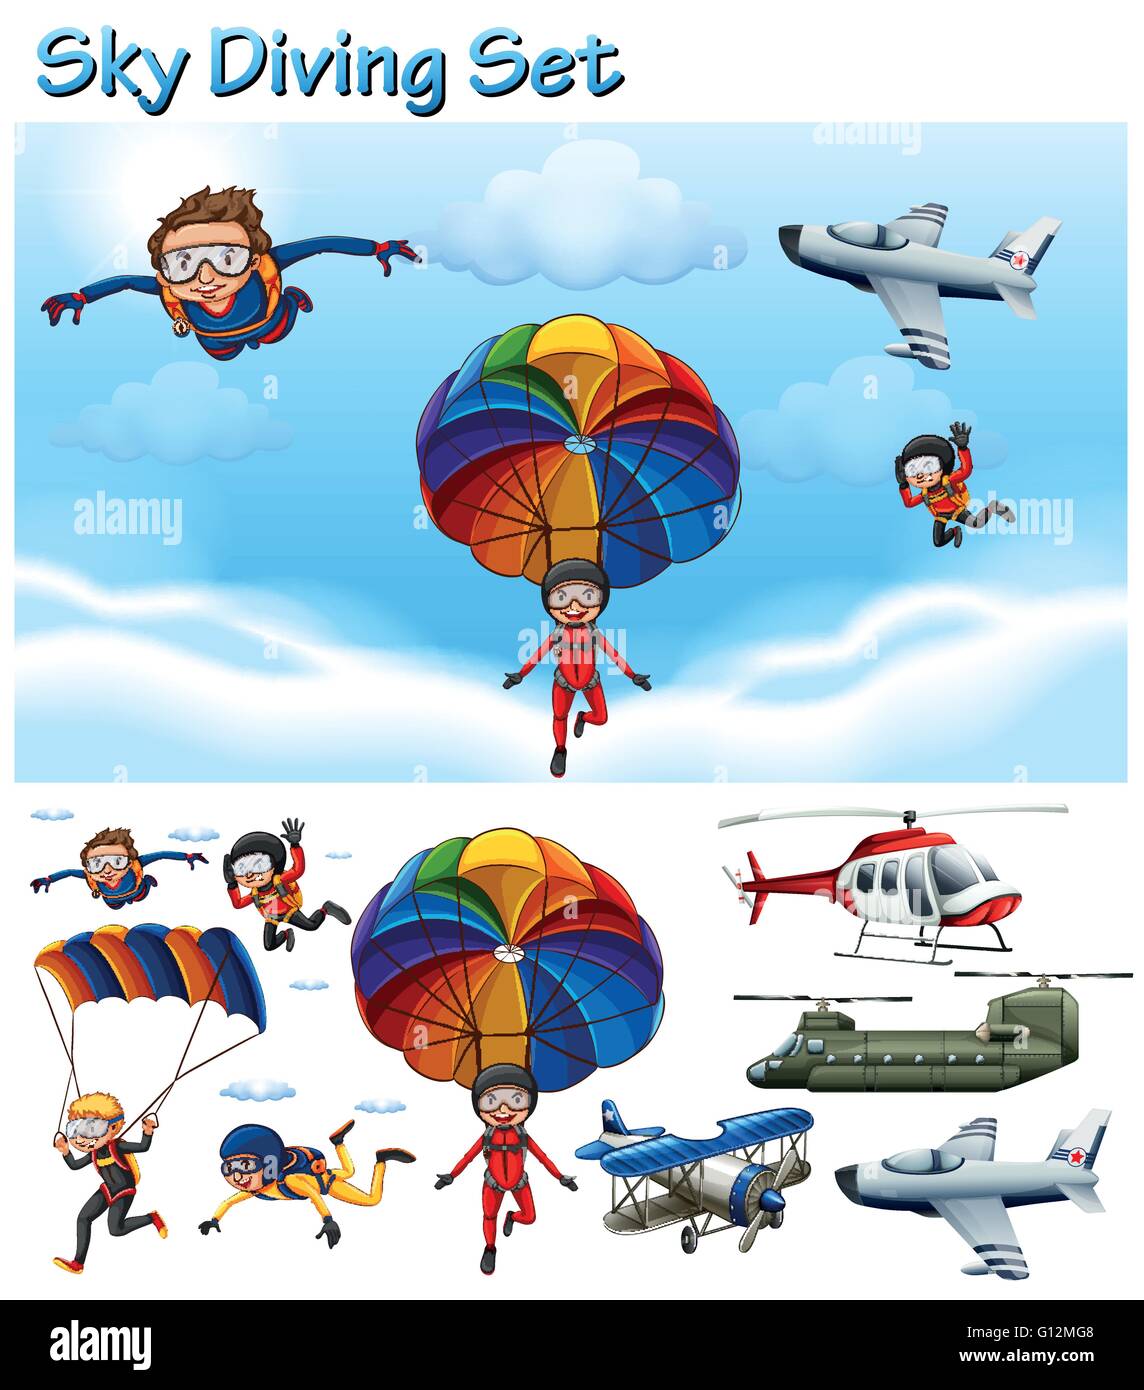 Sky diving set with people and equipment illustration Stock Vector